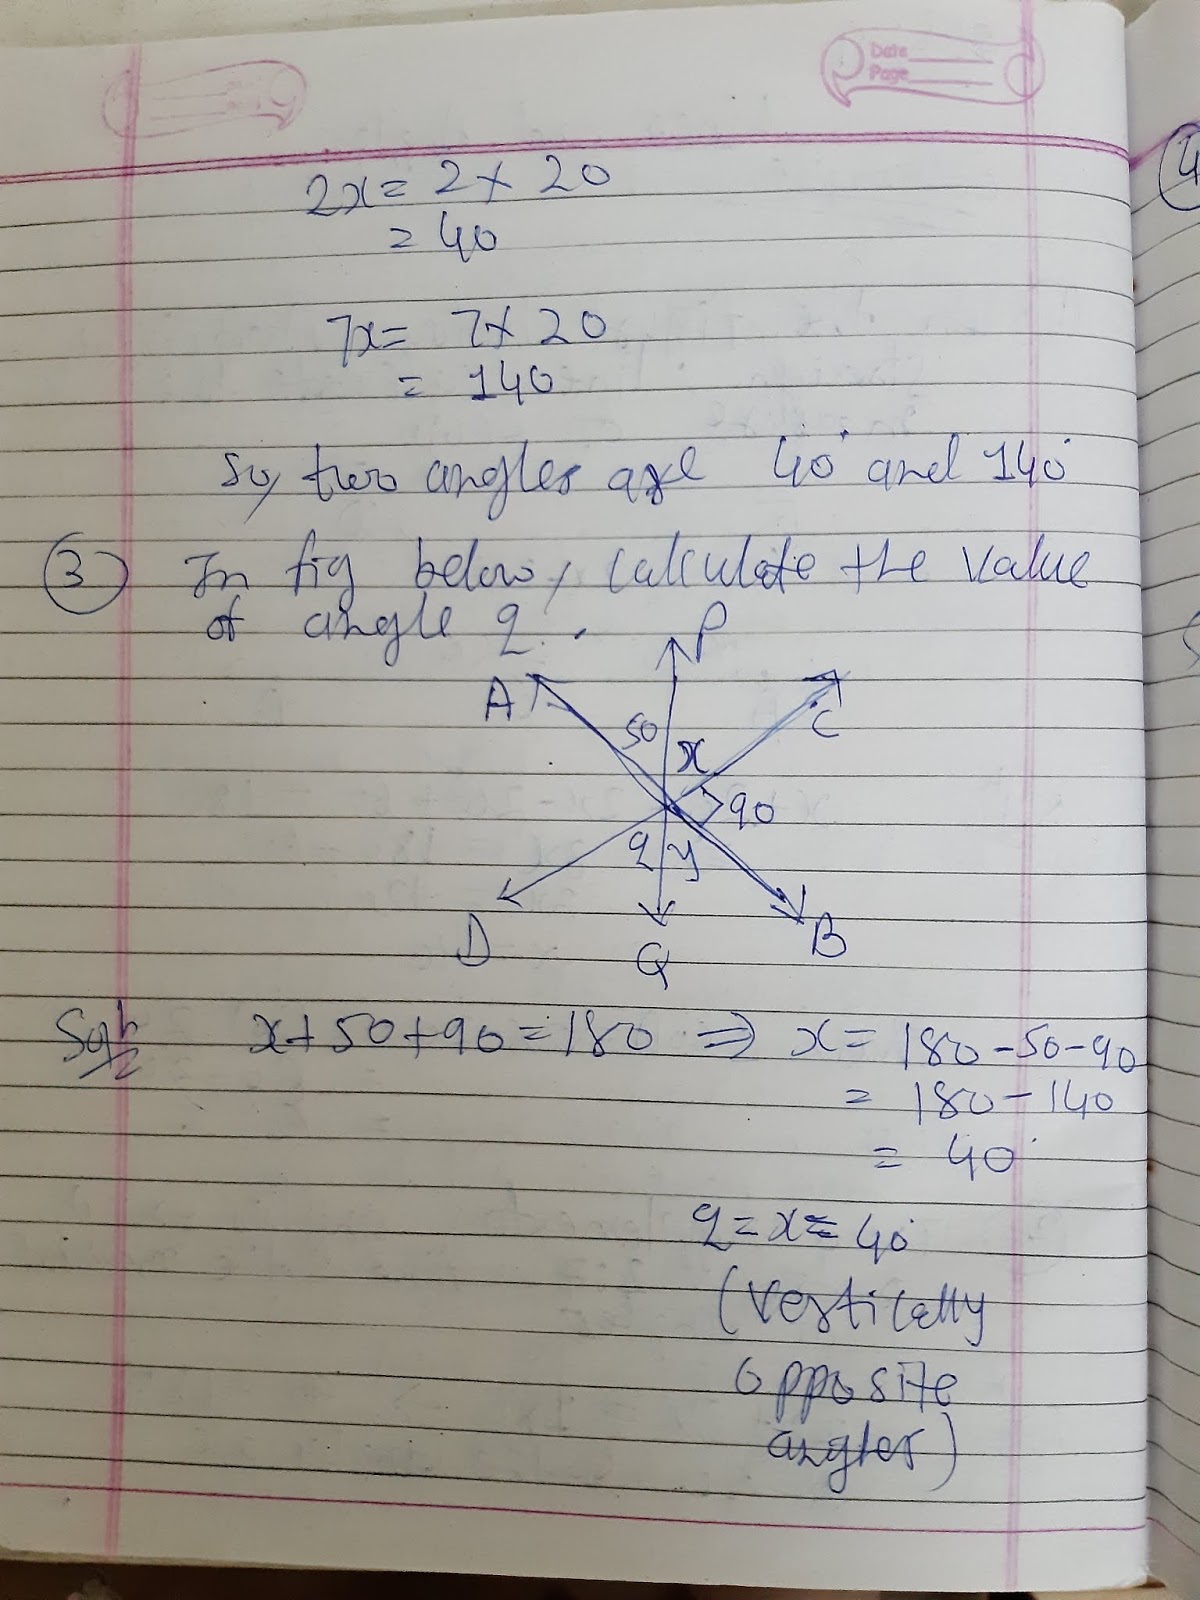 Math Grade 9th Chapter 6 Lines and Angles 29/05/20 class work